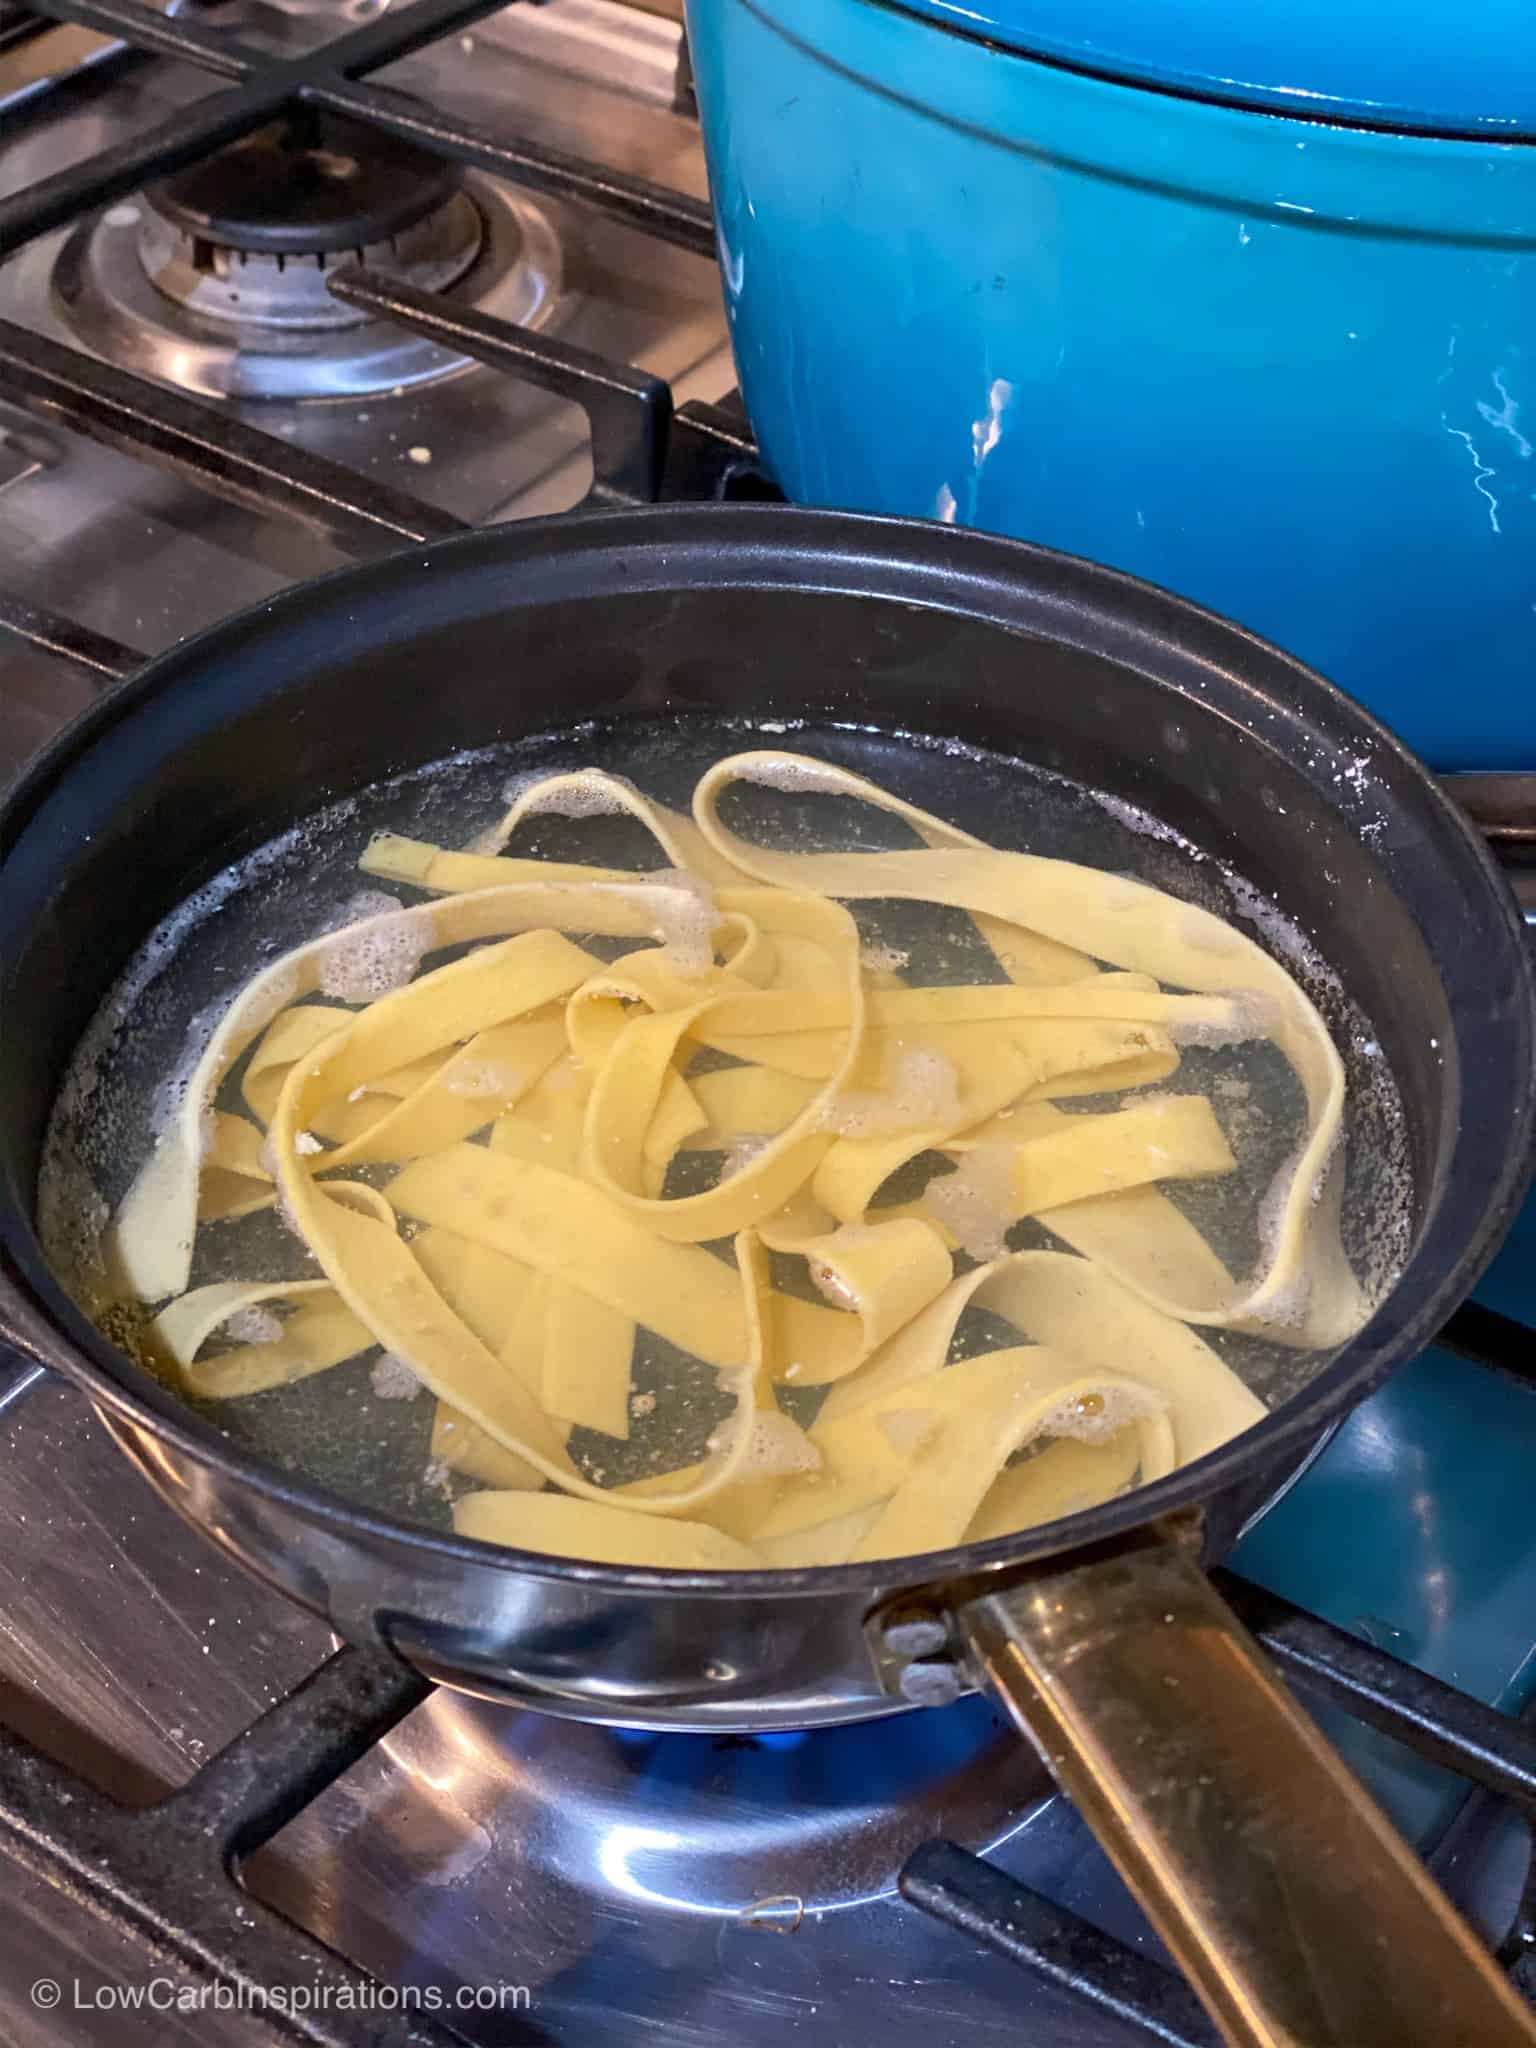 Keto Noodles made with Lupin Flour